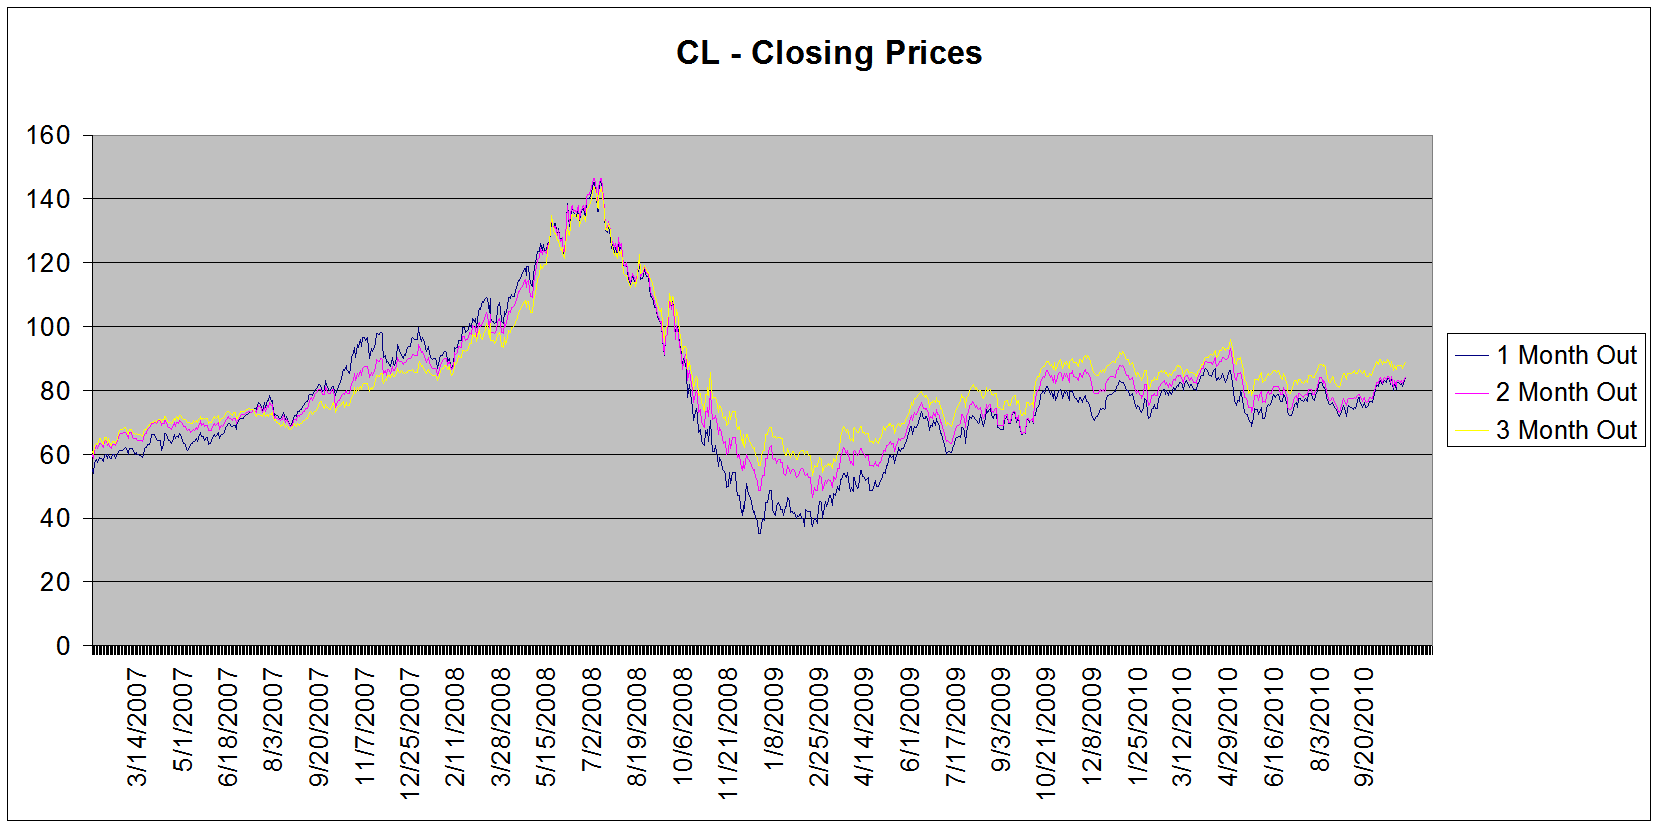 closing prices for back adjusted CL contracts 1, 2 and 3 months out.